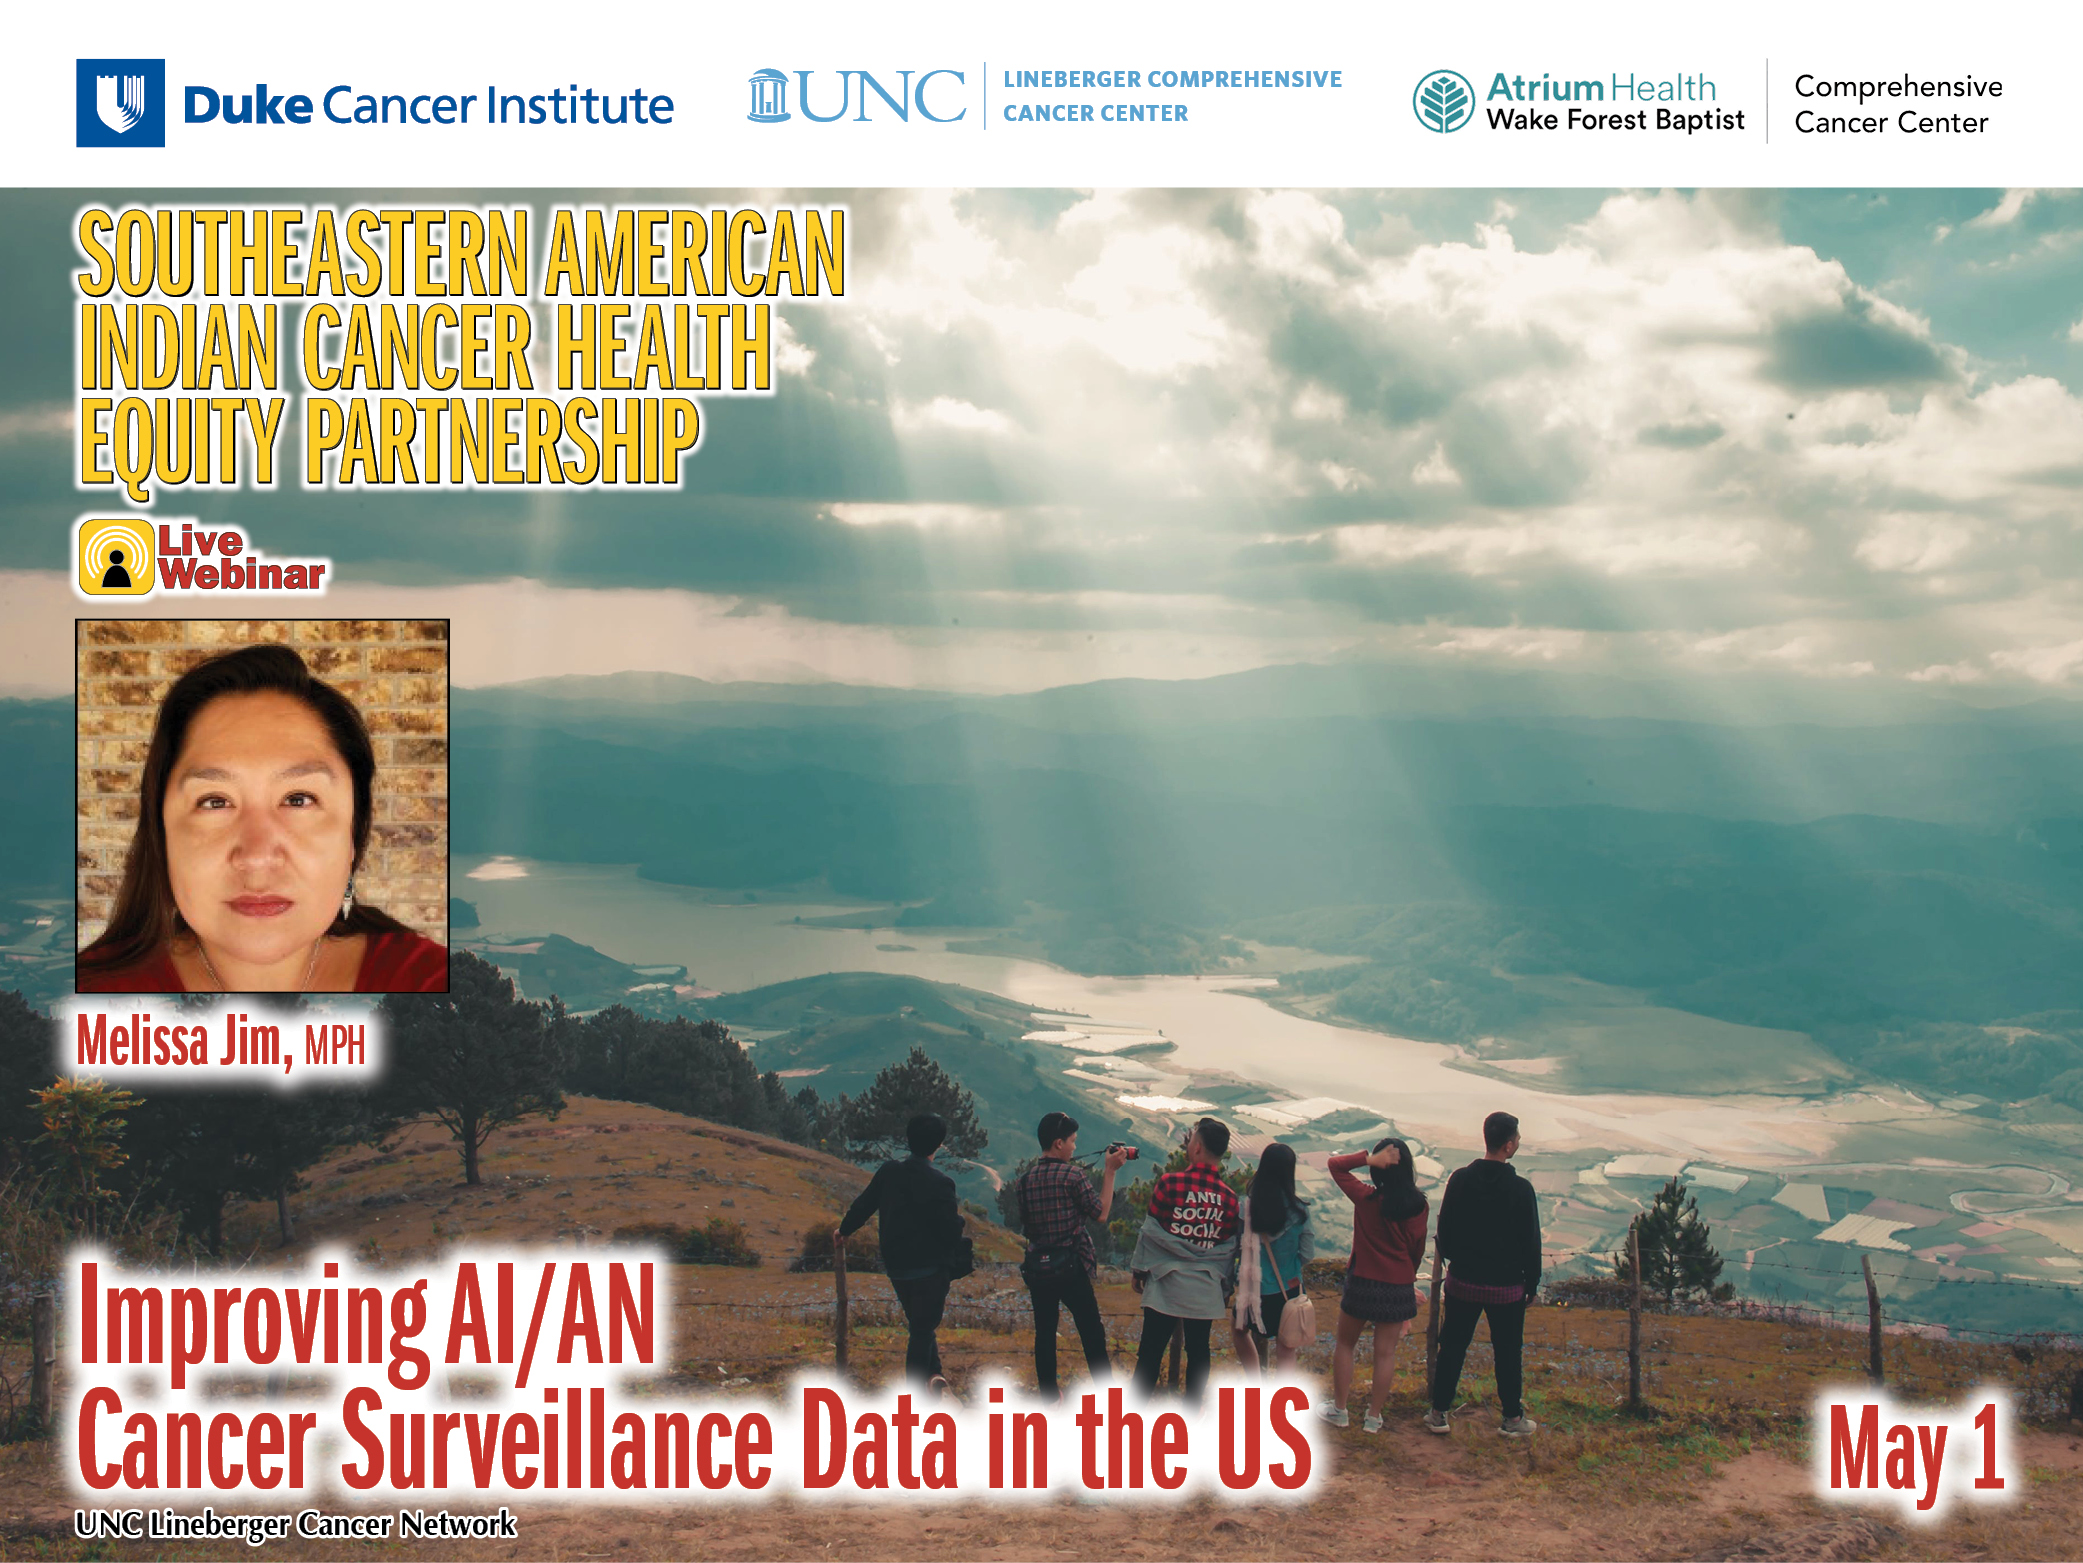 Improving AI/AN Cancer Surveillance Data in the US